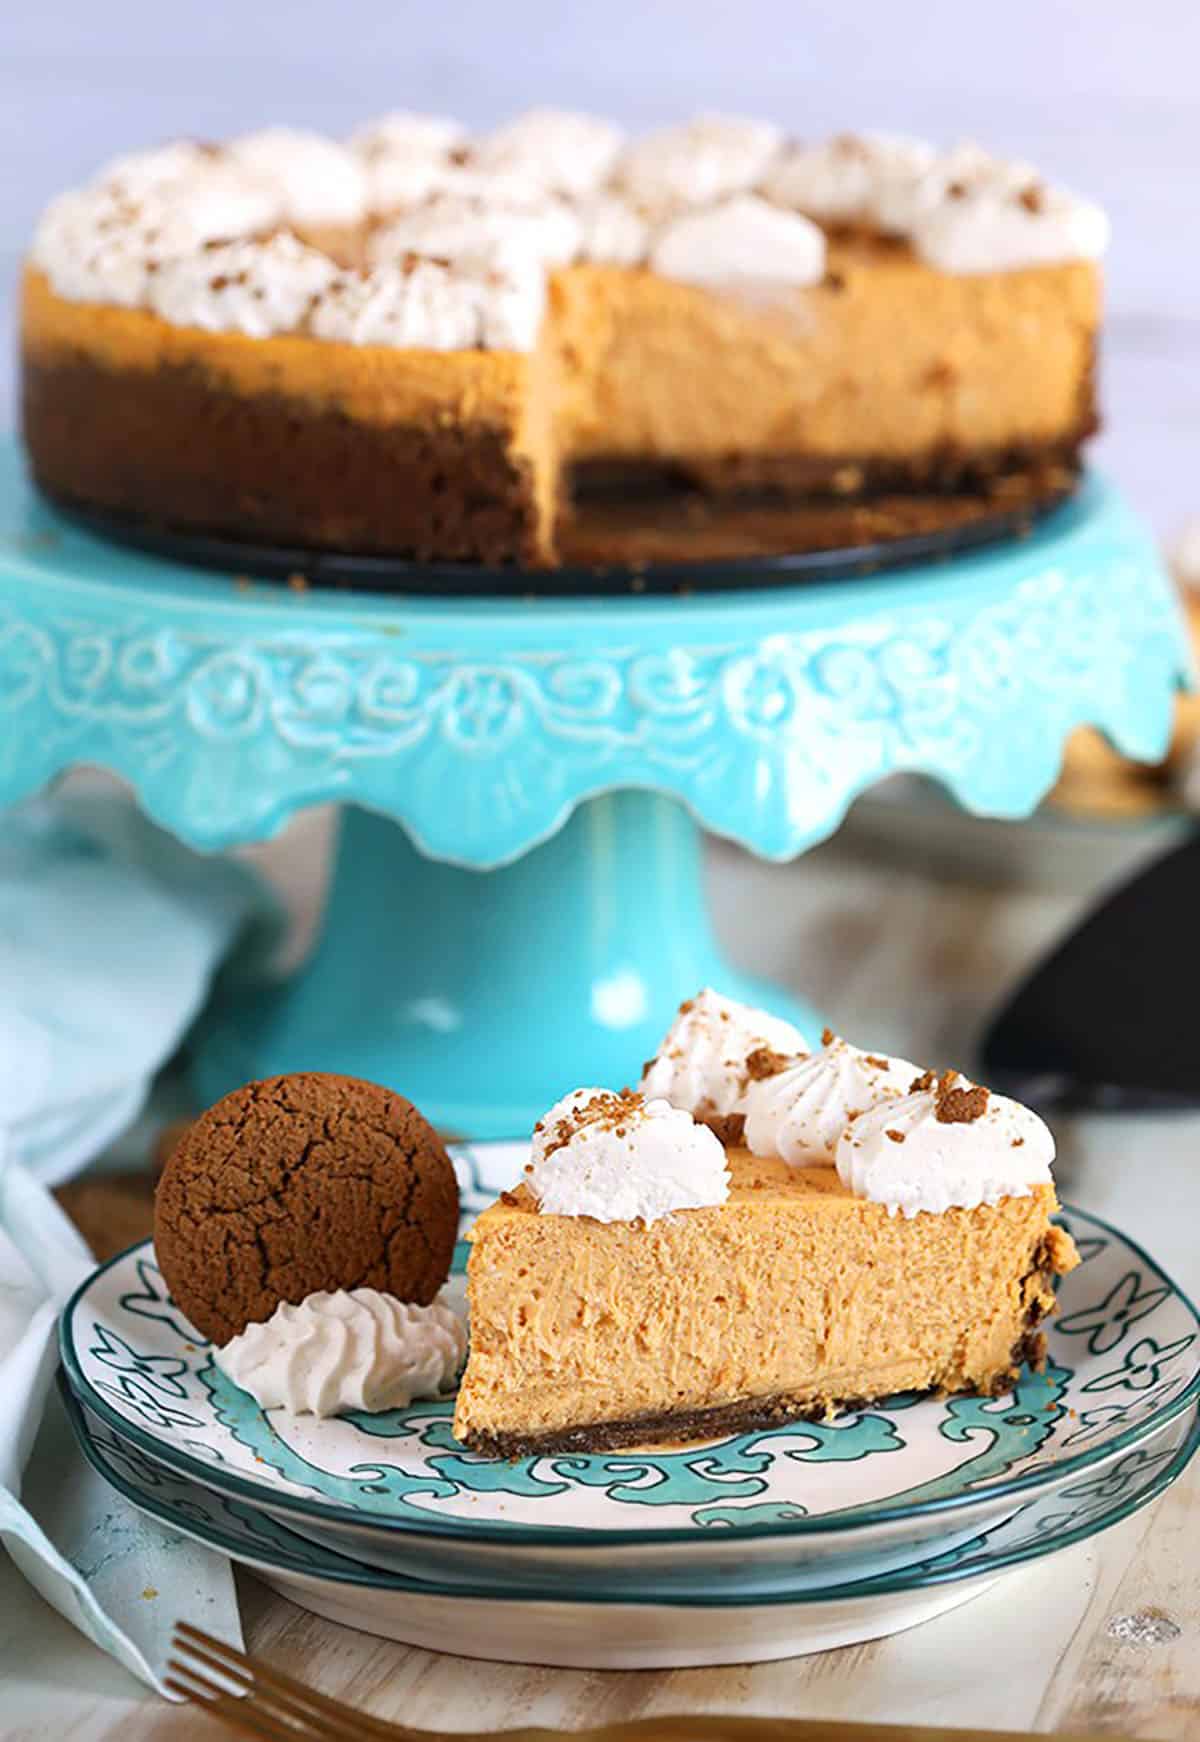 Pumpkin Cheesecake on an turquoise cake plate with a slice of cheesecake on a plate in front of it.